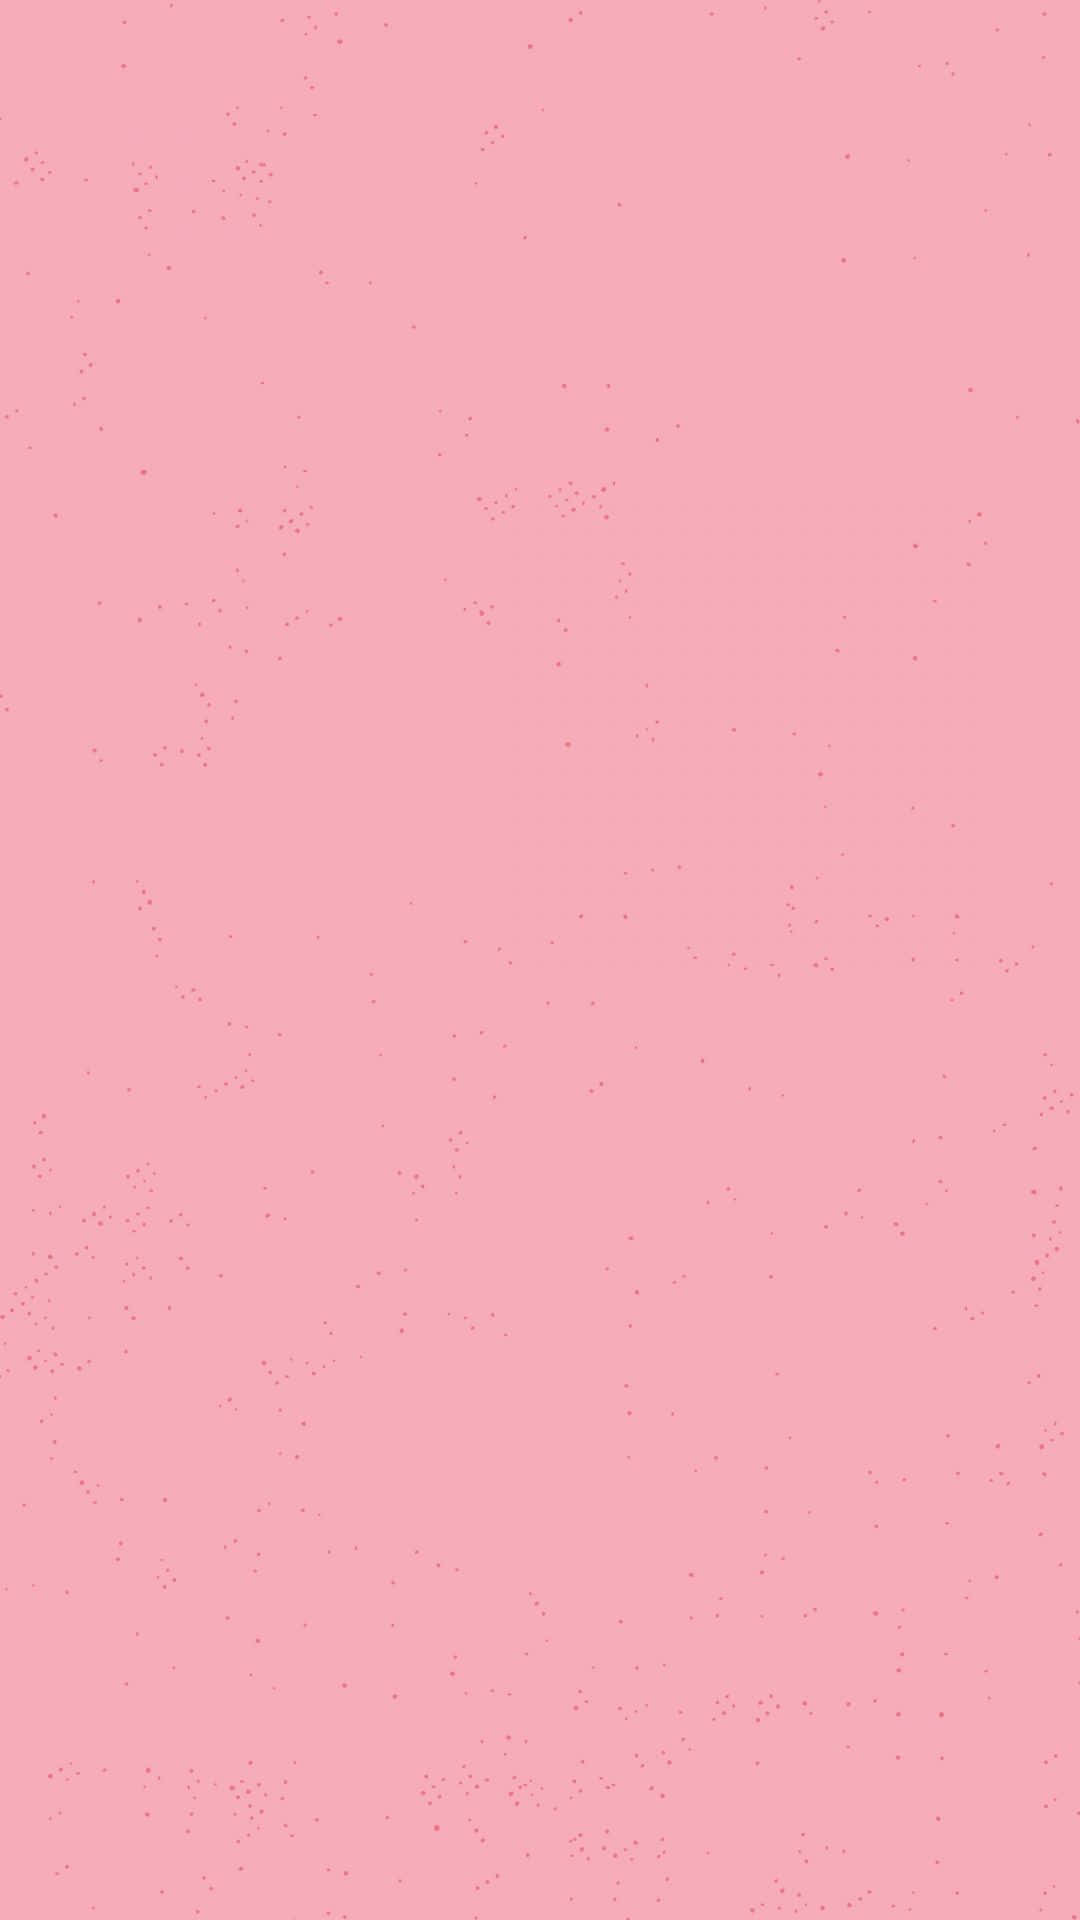 Simple Pink Background Wallpaper